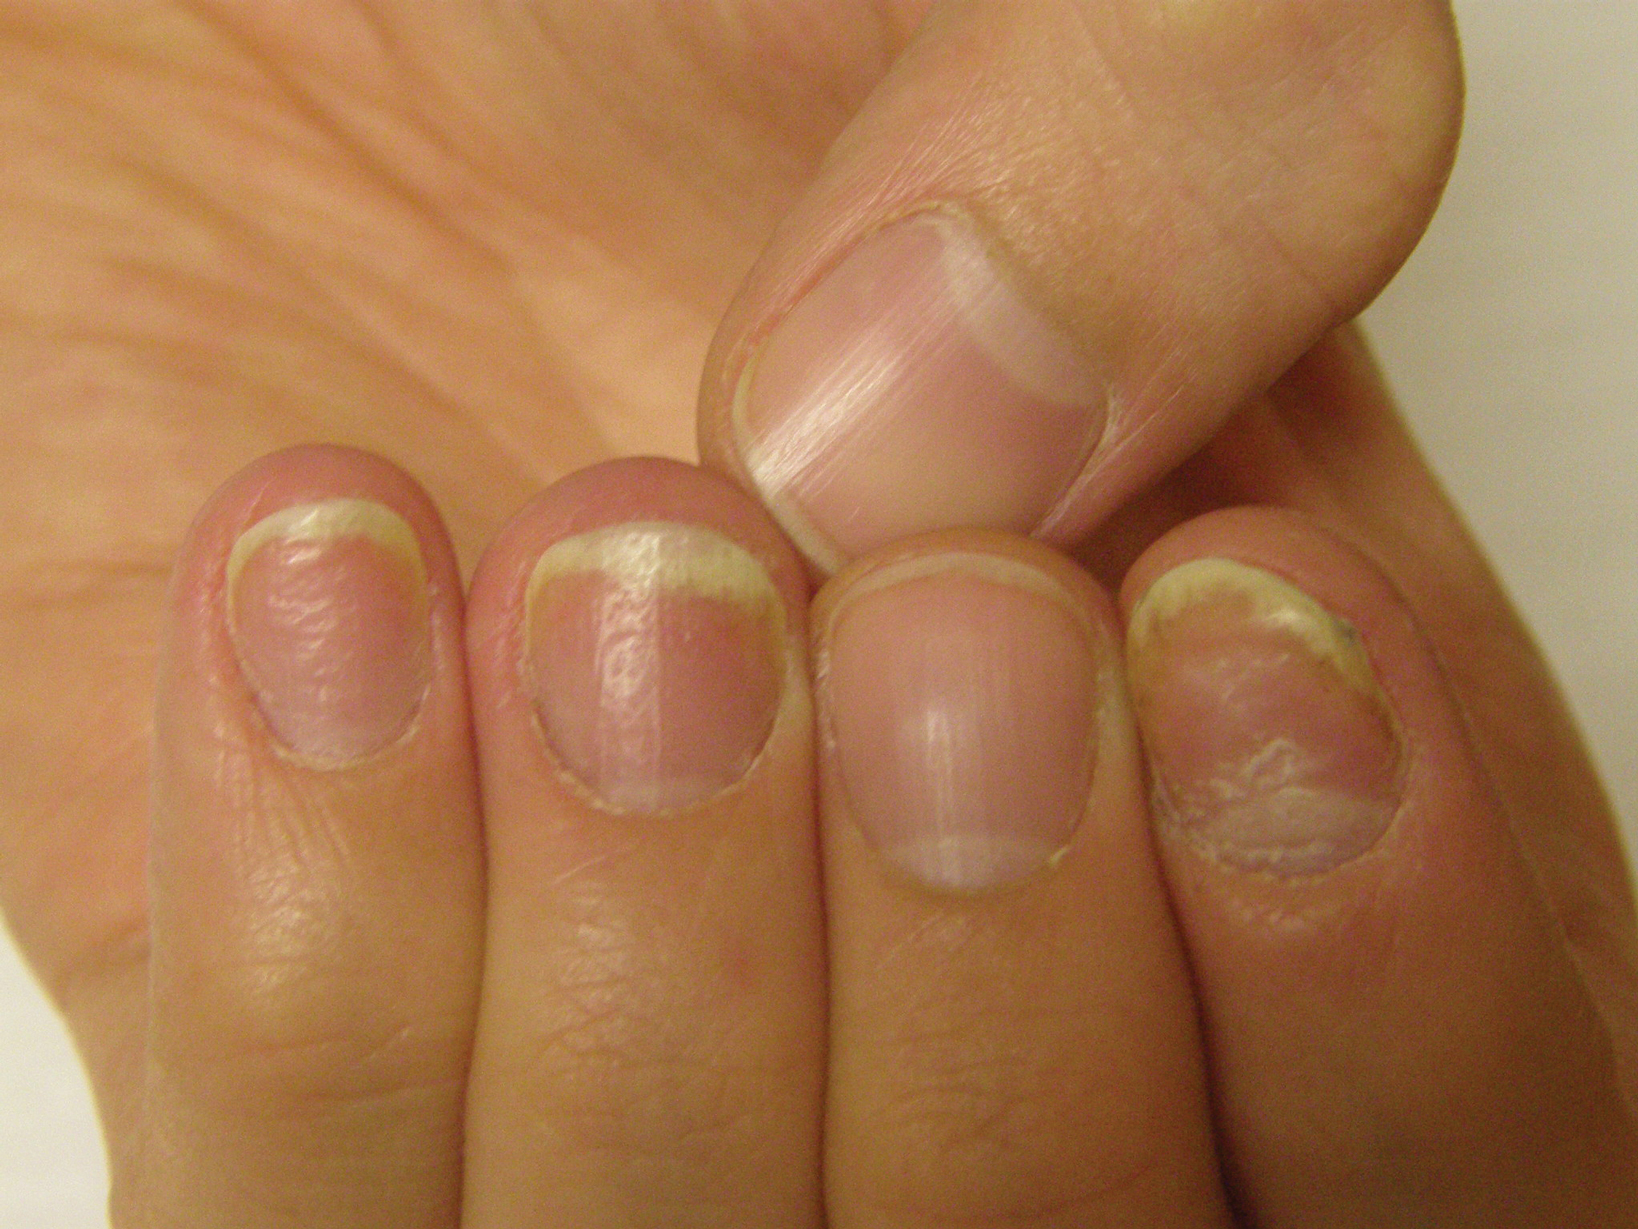 nail psoriasis causes and treatment